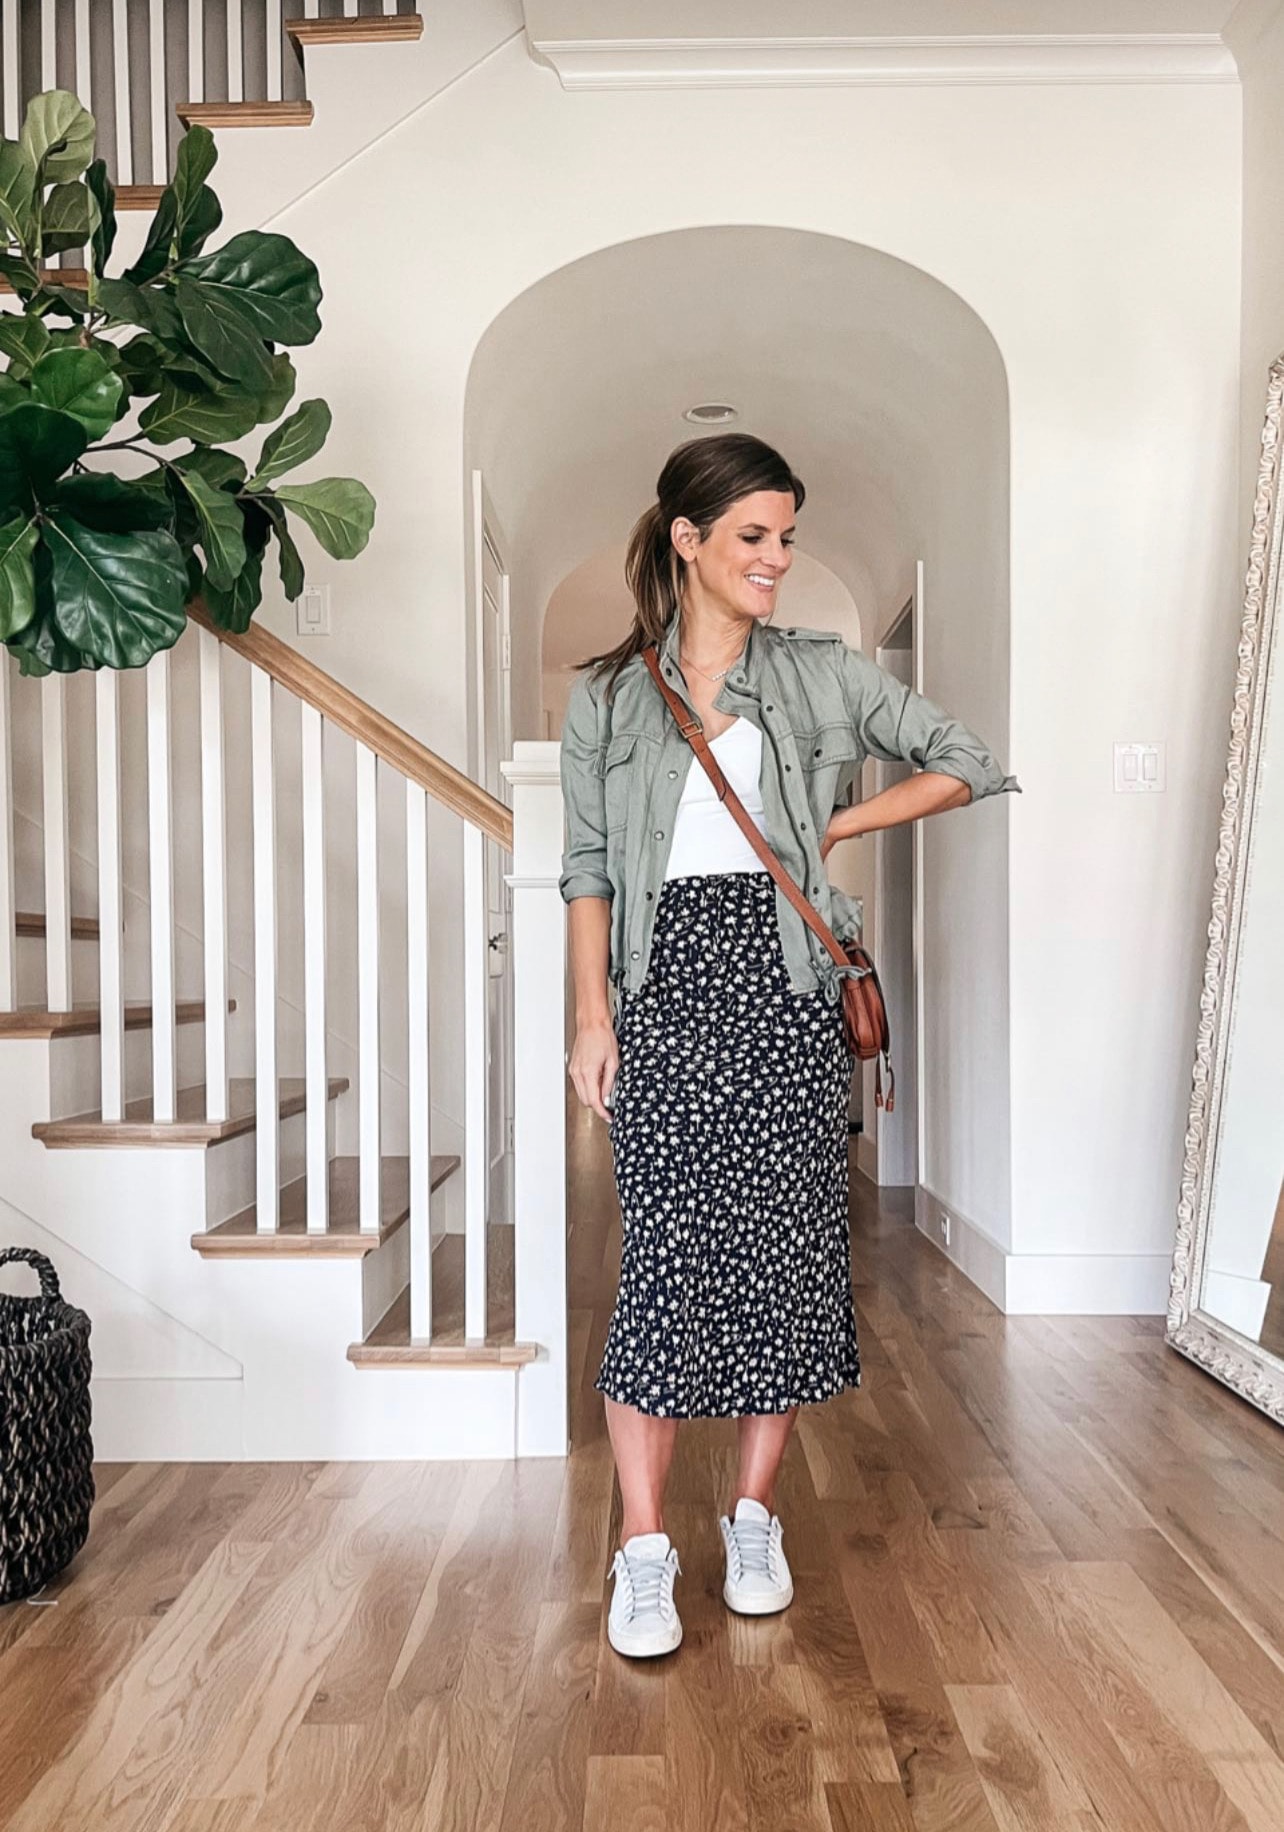 Brighton Butler wearing maxi skirt, army green jacket and bodysuit